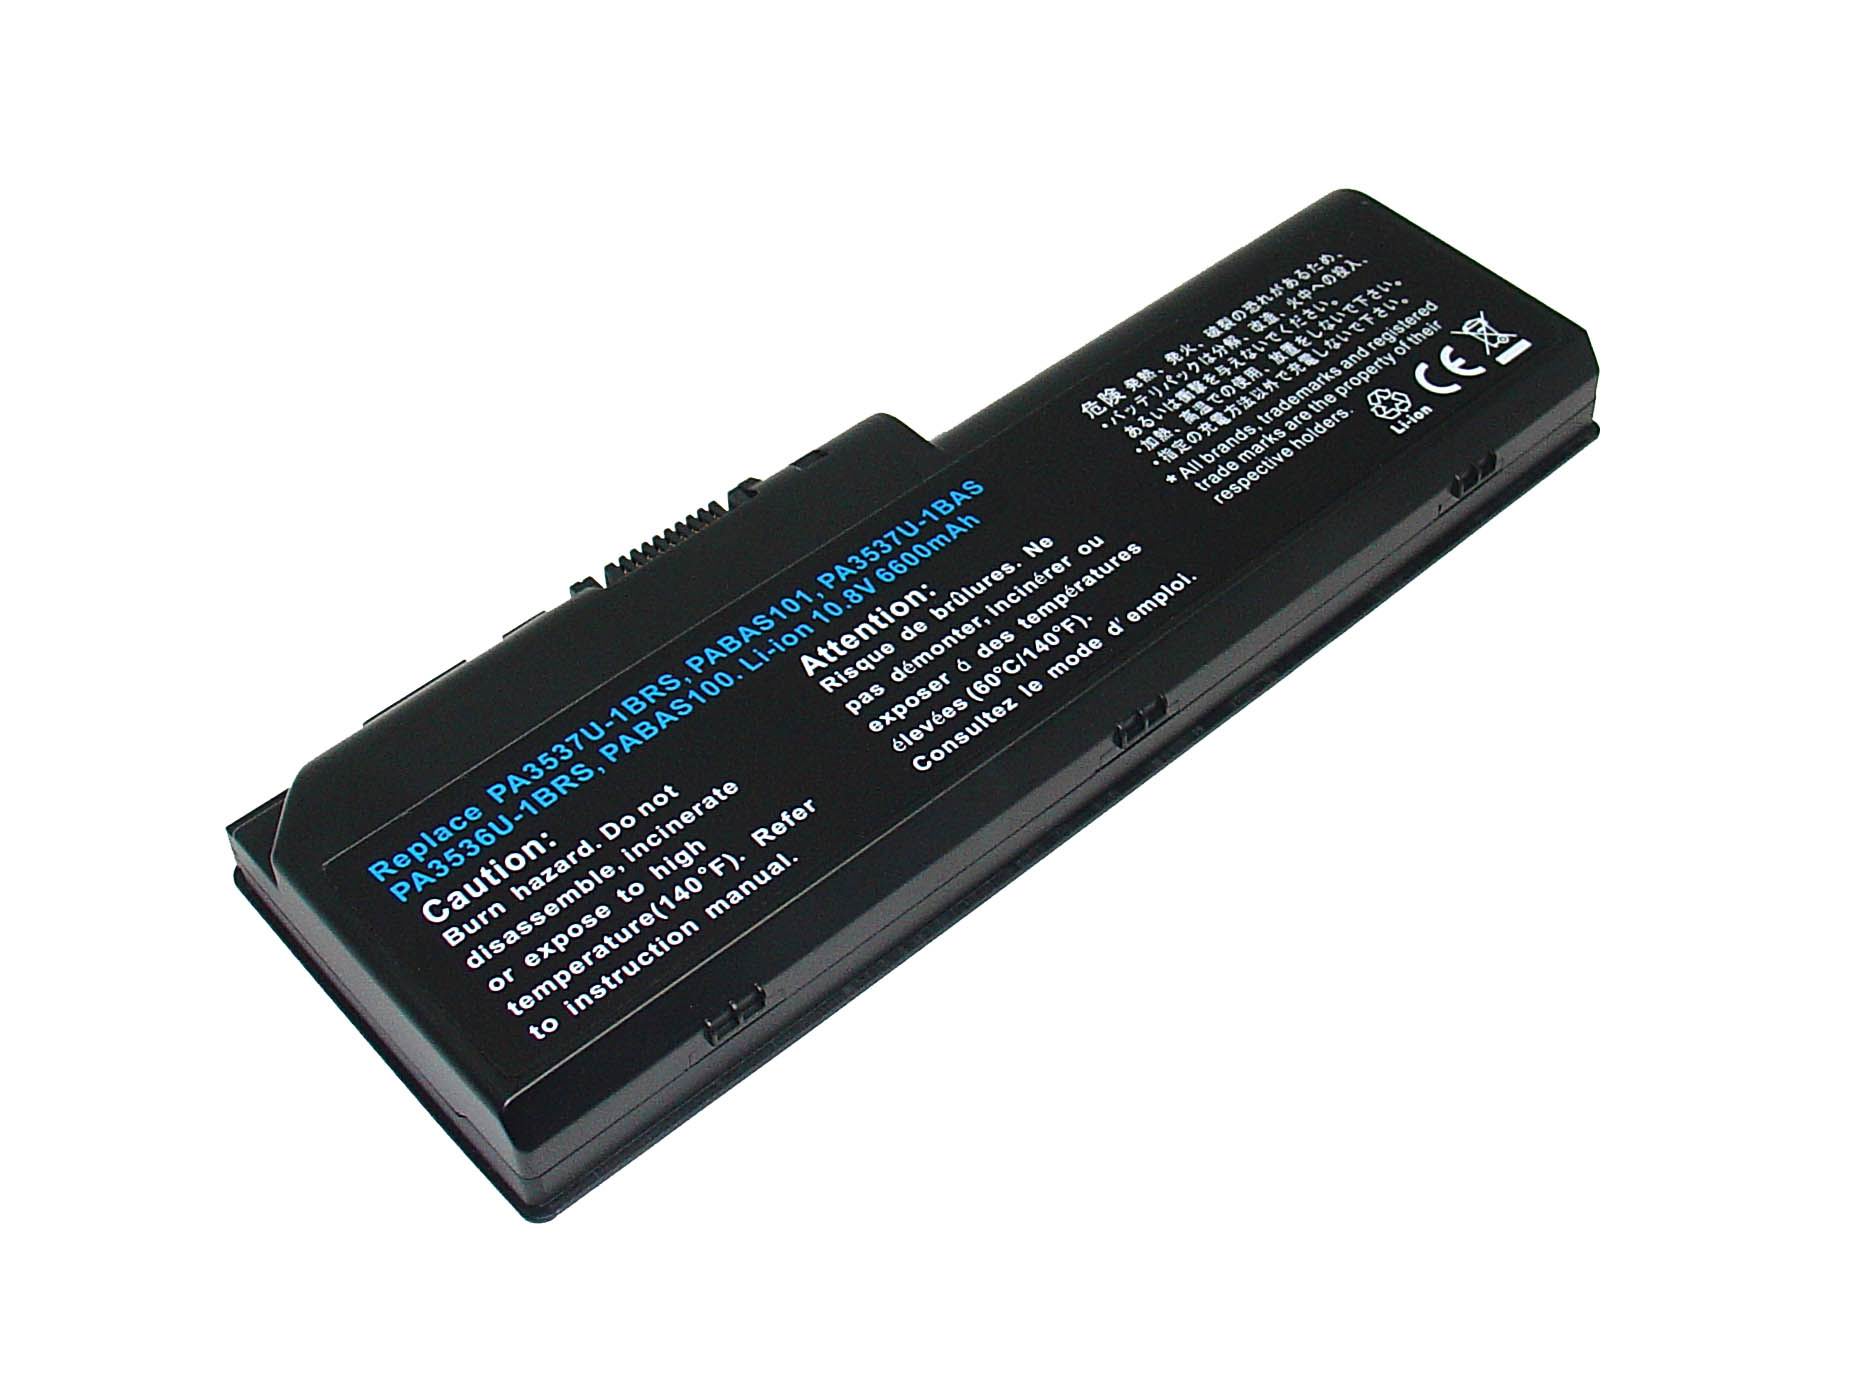 Replacement TOSHIBA Satellite P300D-151 Laptop Battery